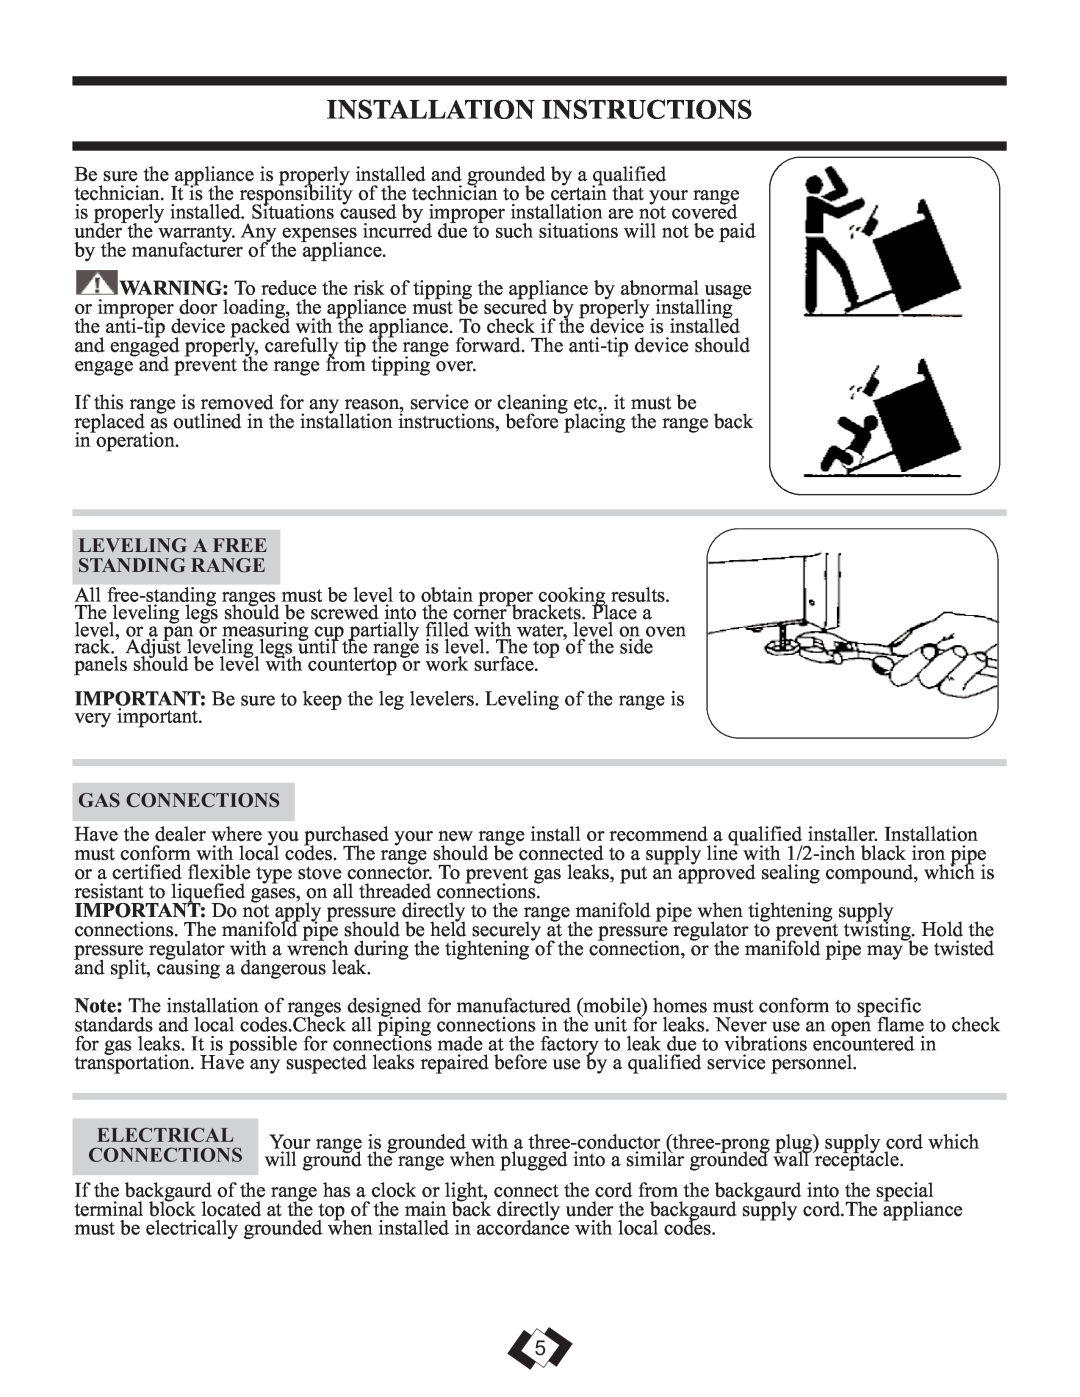 Danby DR2009WGLP Installation Instructions, Leveling A Free Standing Range, Gas Connections, Electrical 